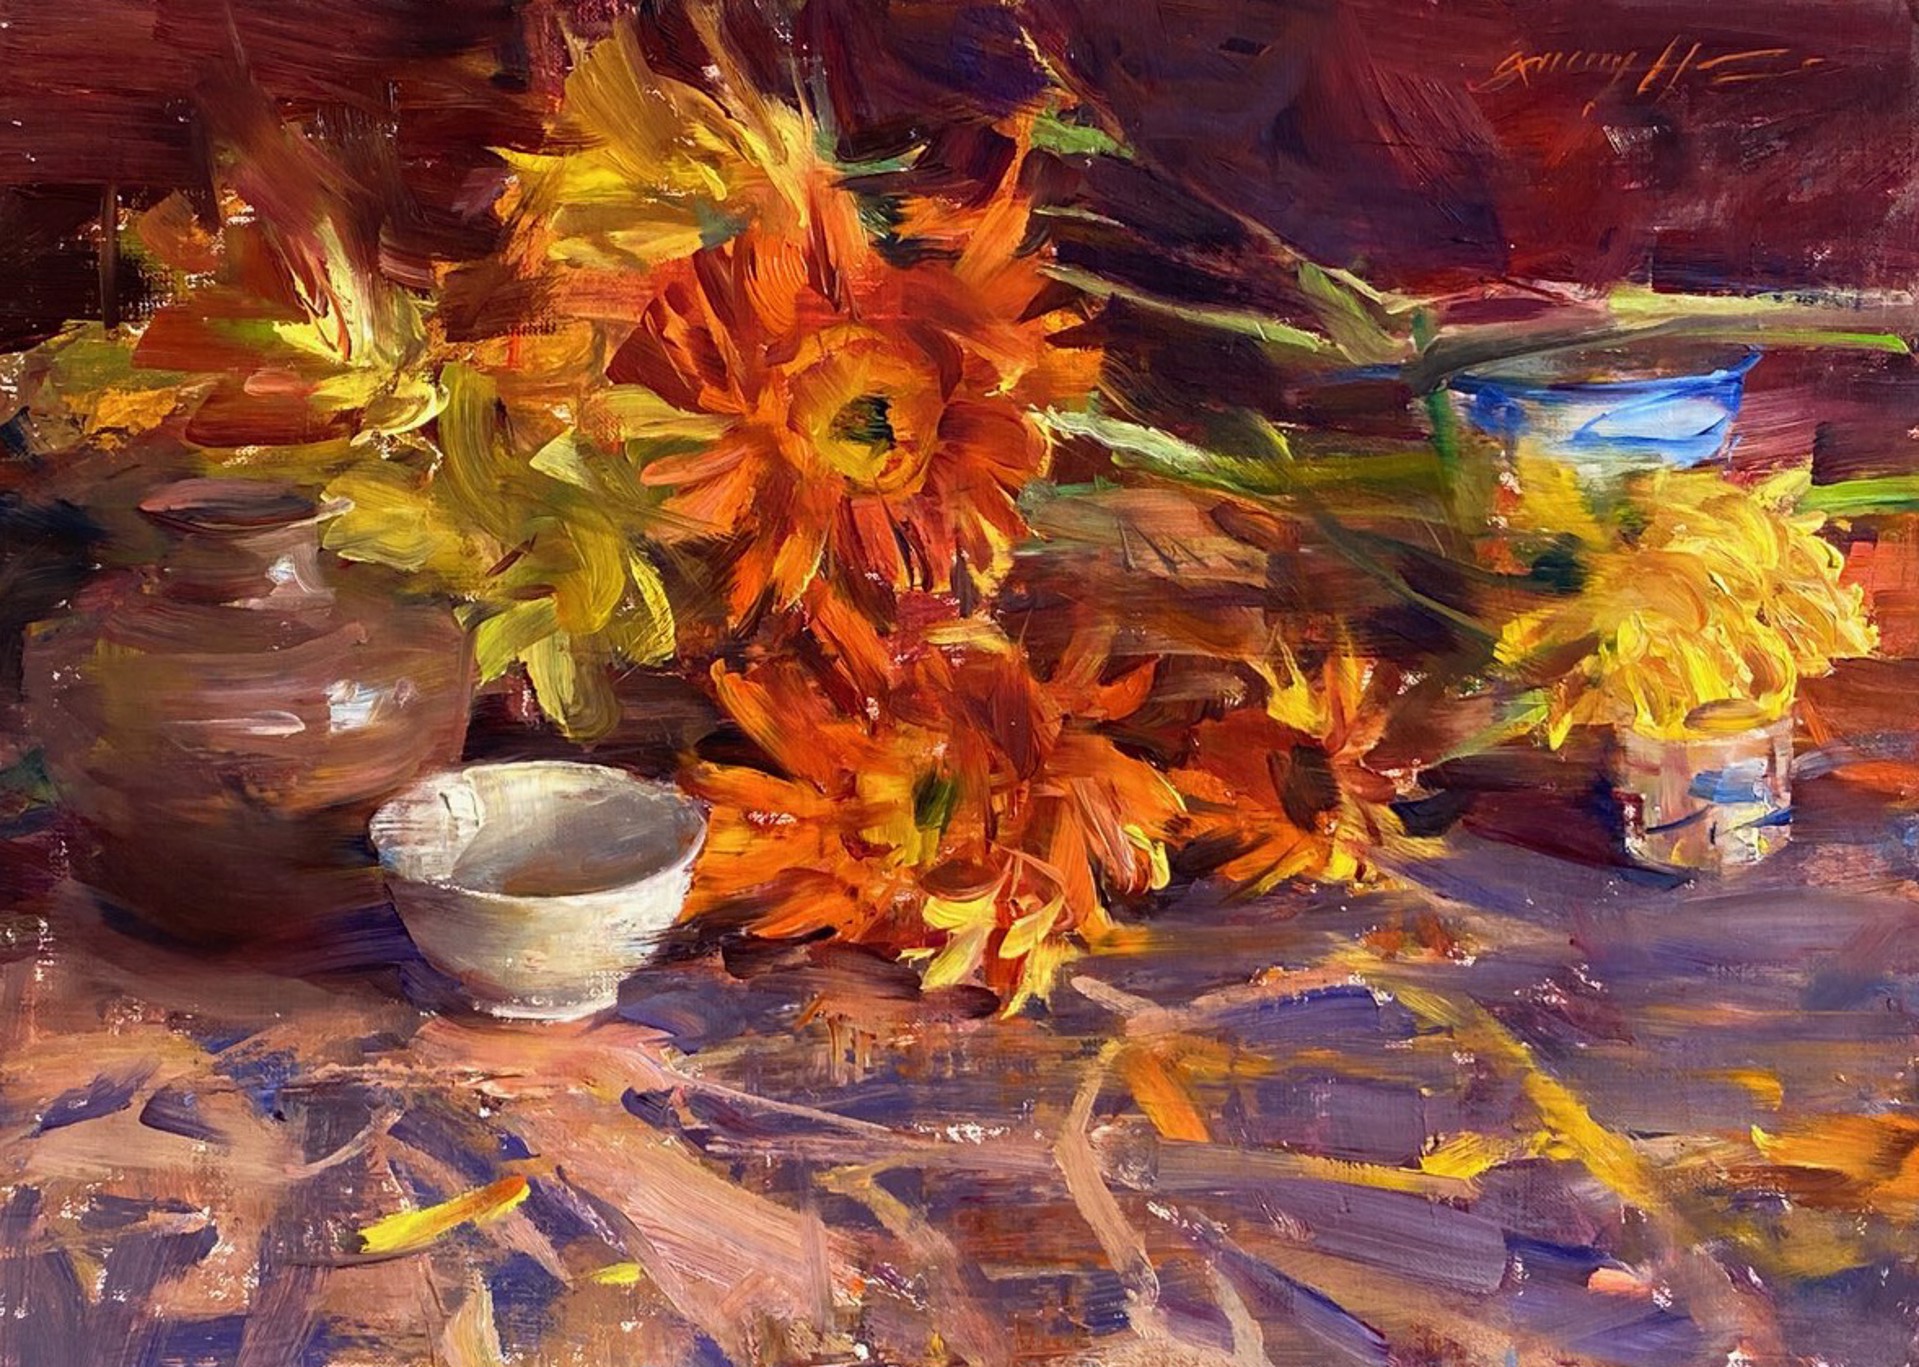 Arrangement with Gerber Daisies by Quang Ho